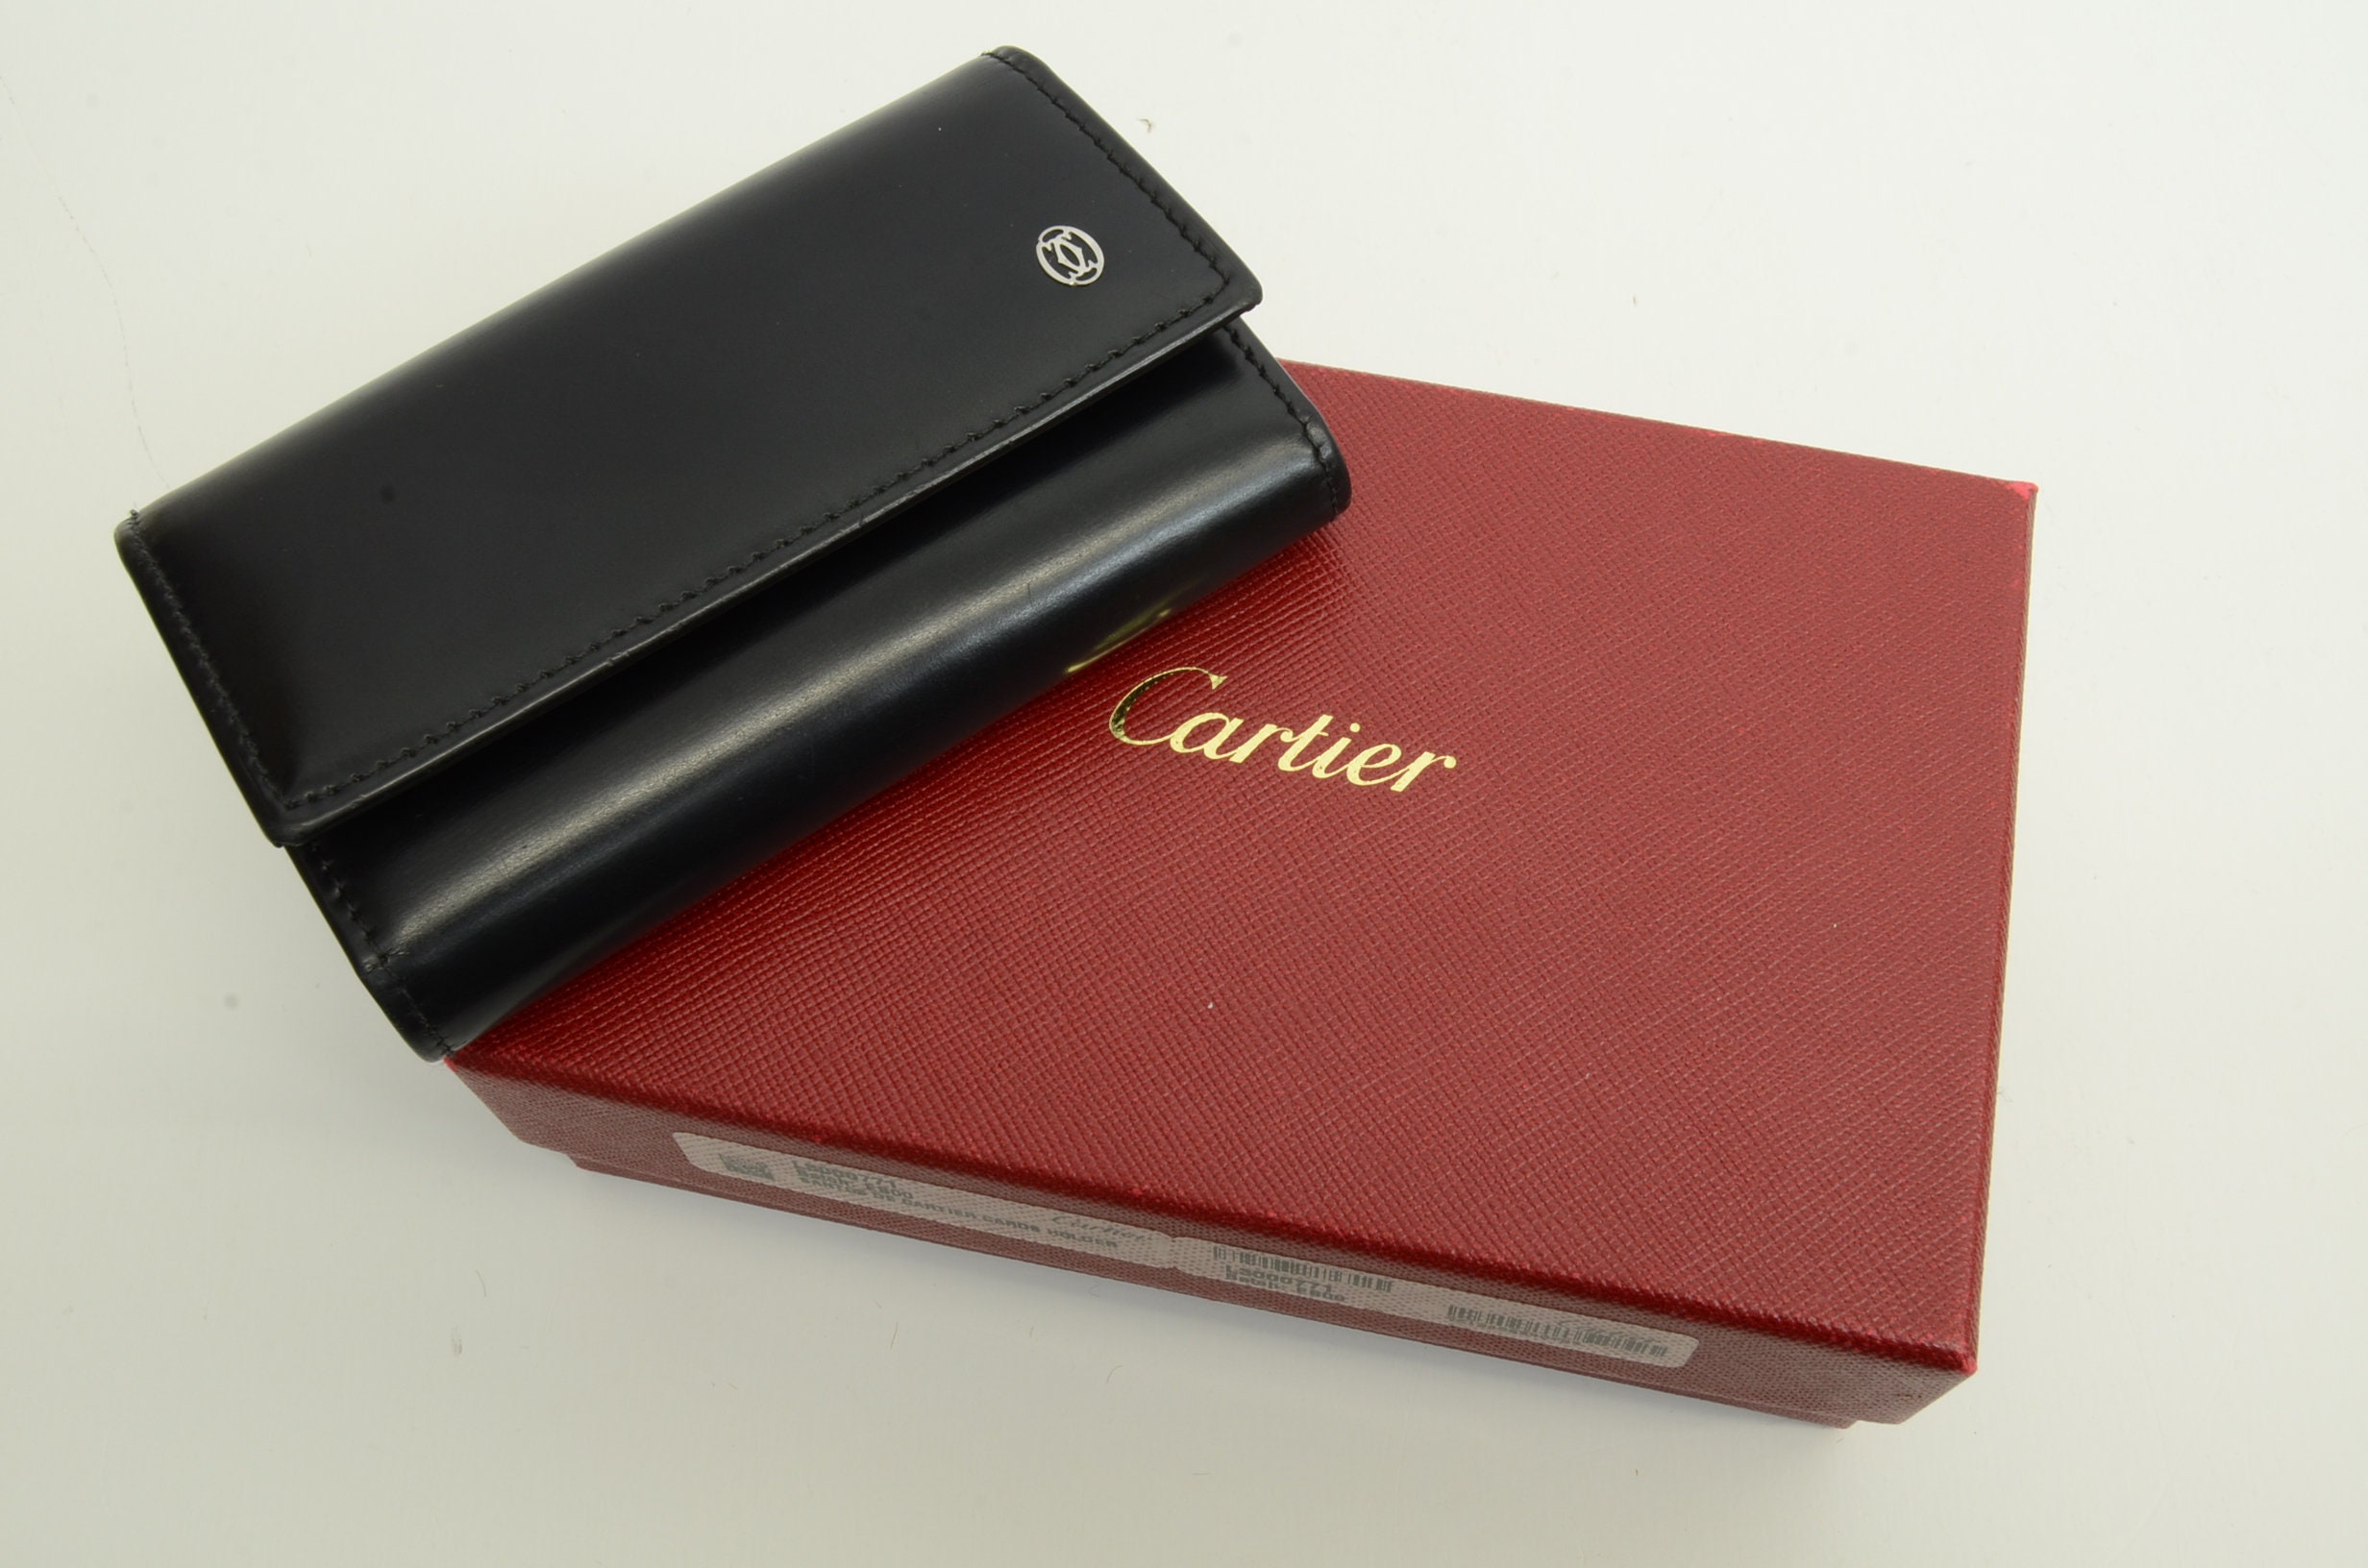 Authentic MUST DE CARTIER SMALL LEATHER GOODS, 6-KEY KEY RING